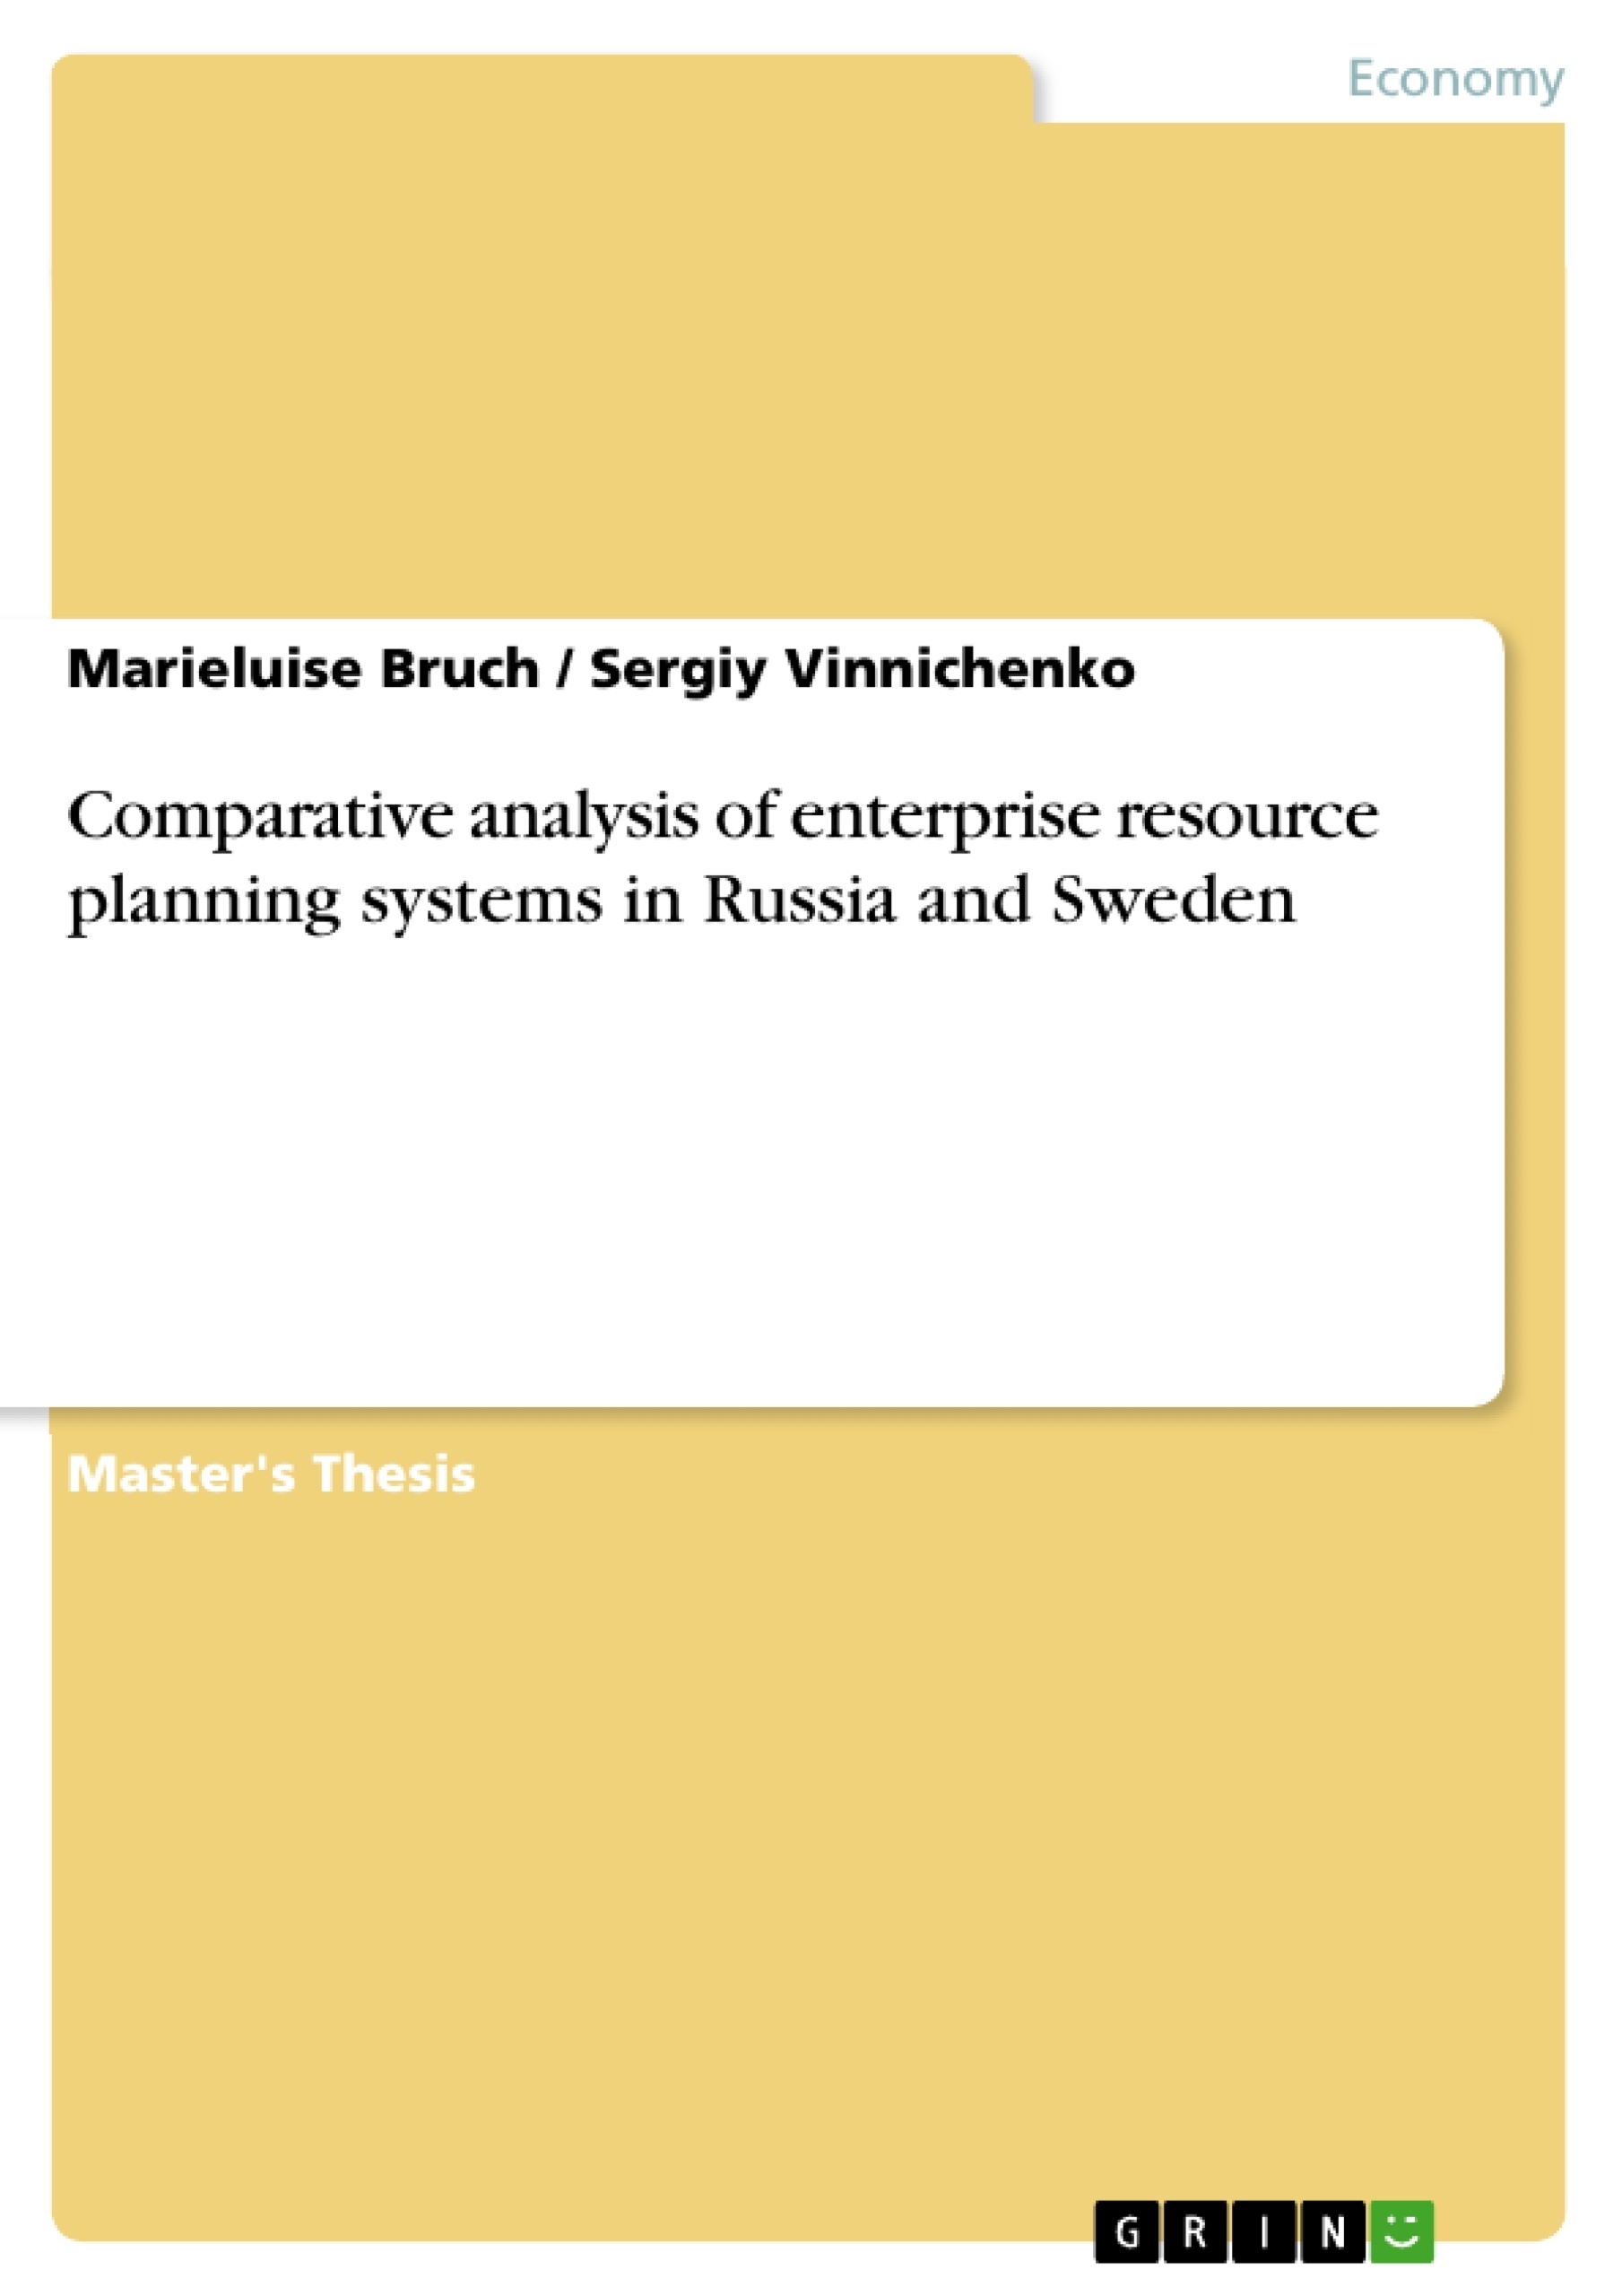 Titel: Comparative analysis of enterprise resource planning systems in Russia and Sweden